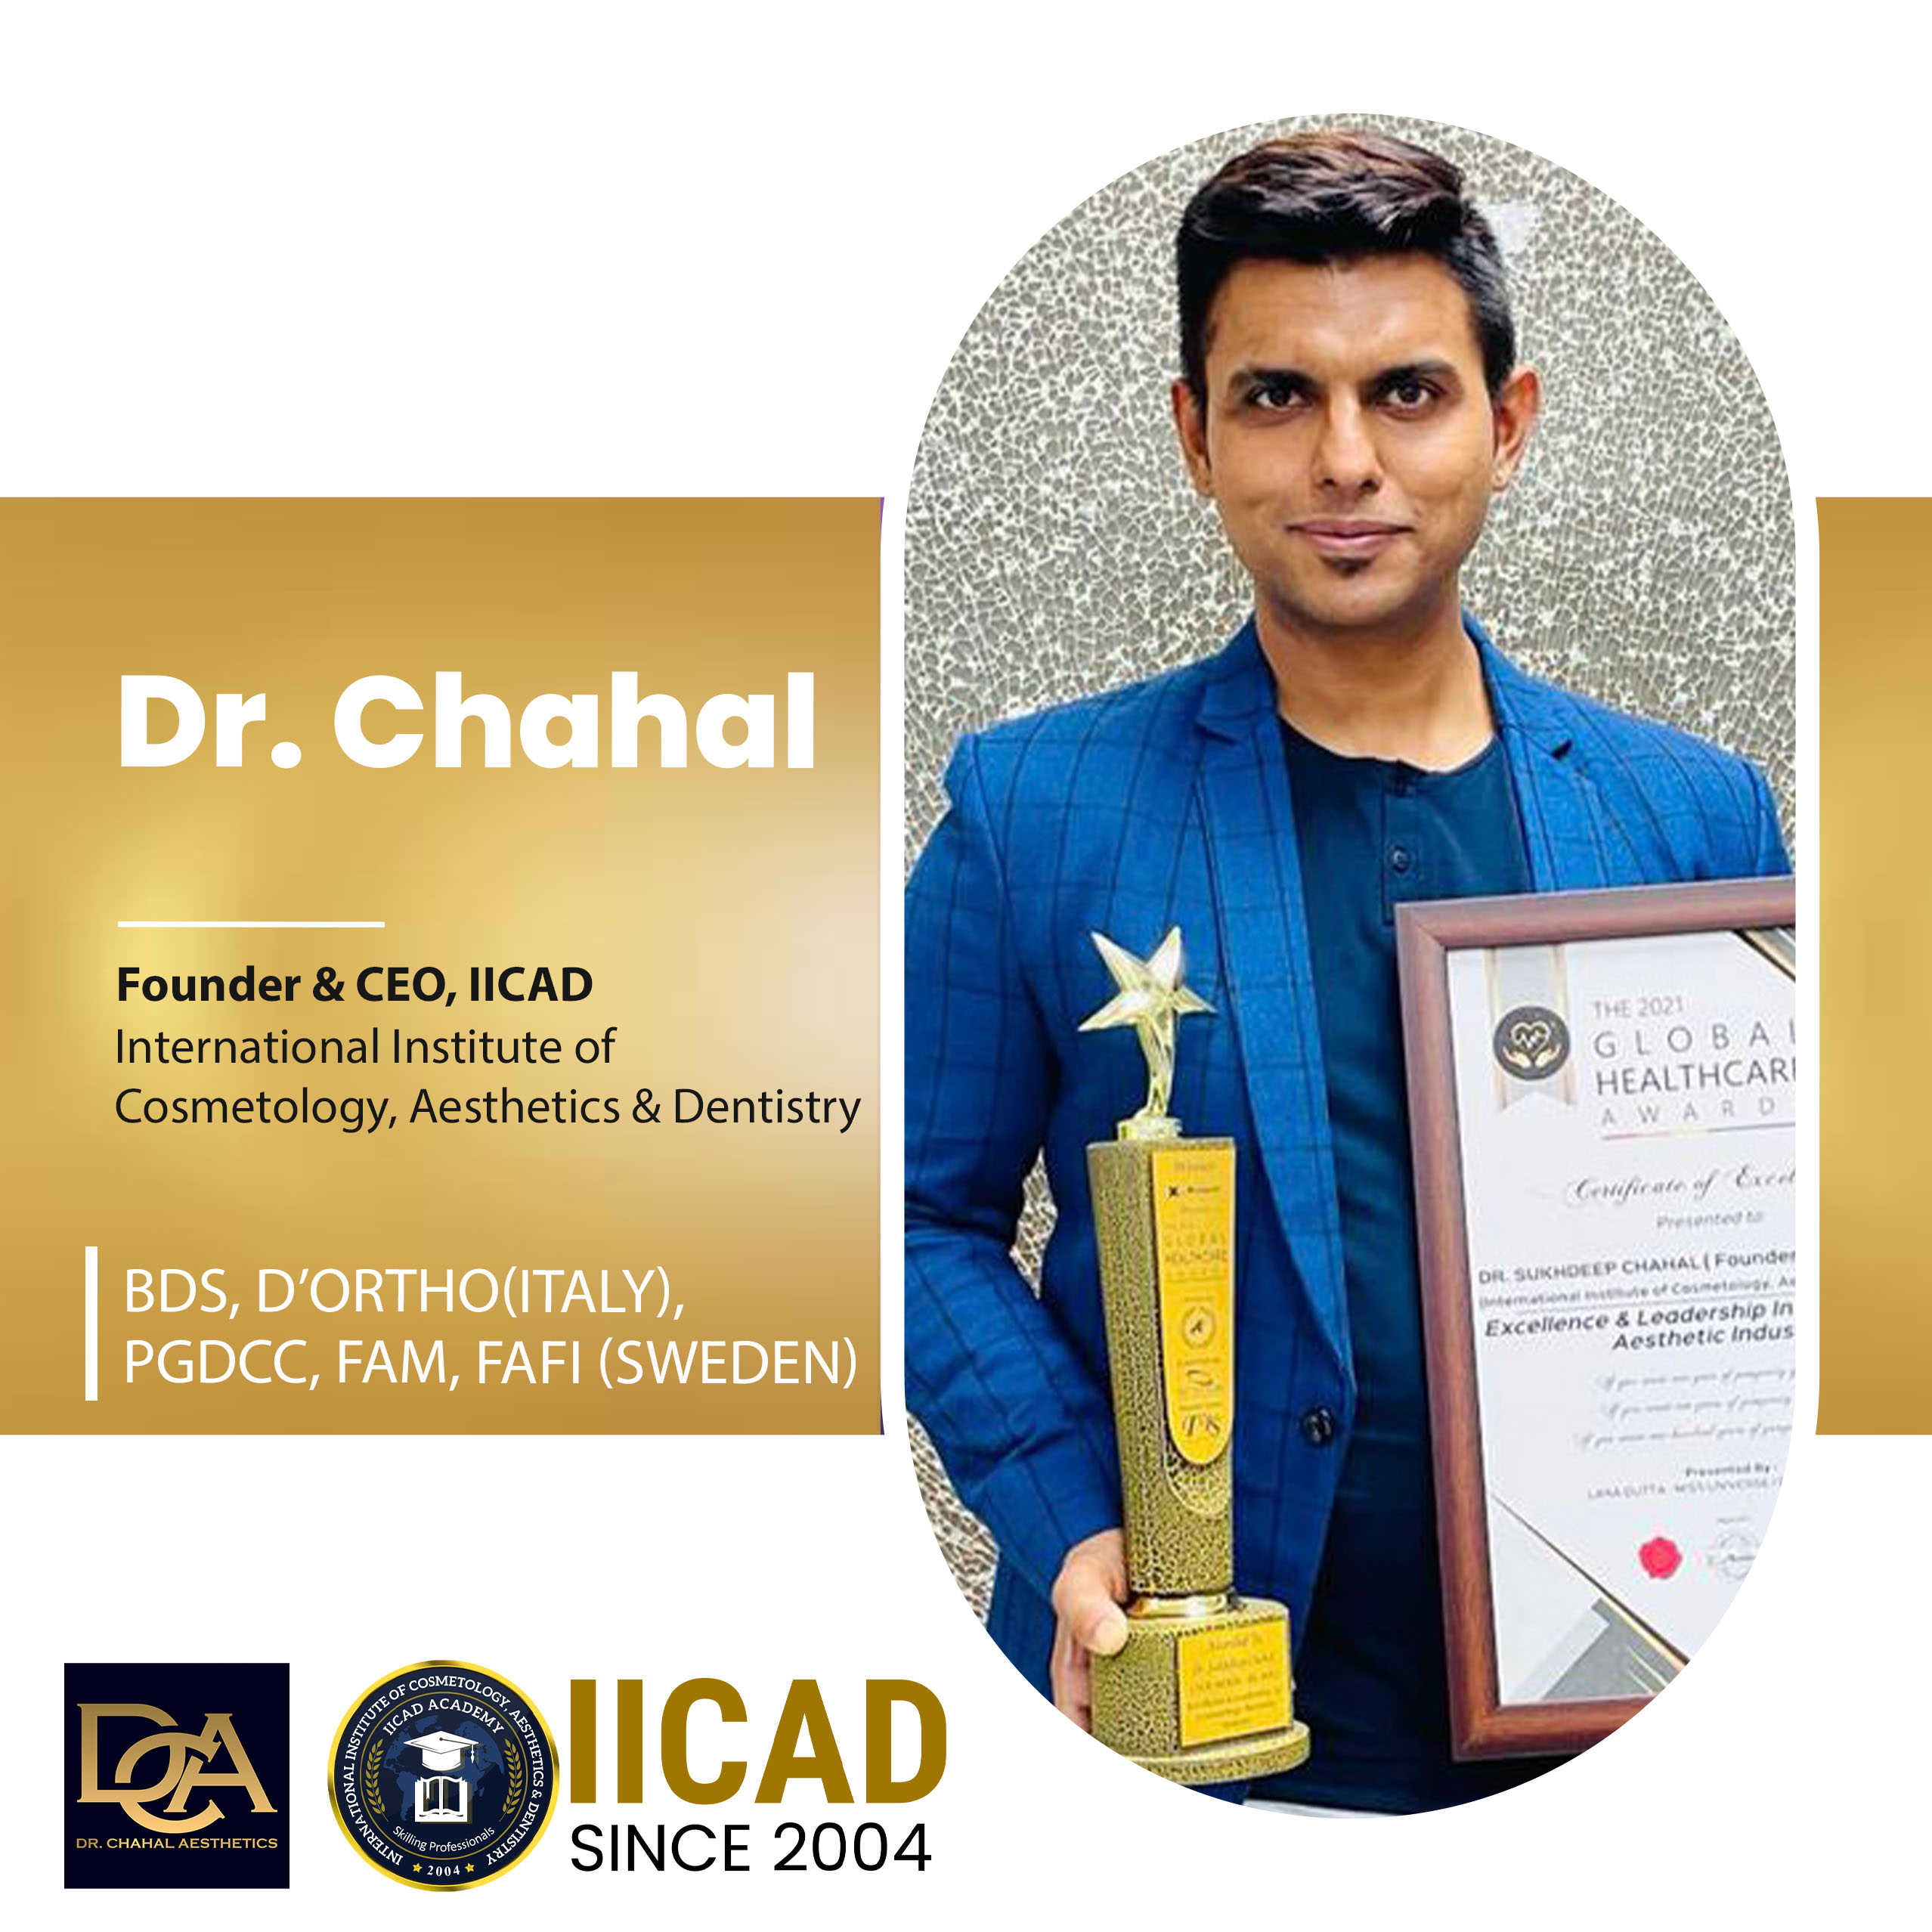 Founder & CEO of IICAD